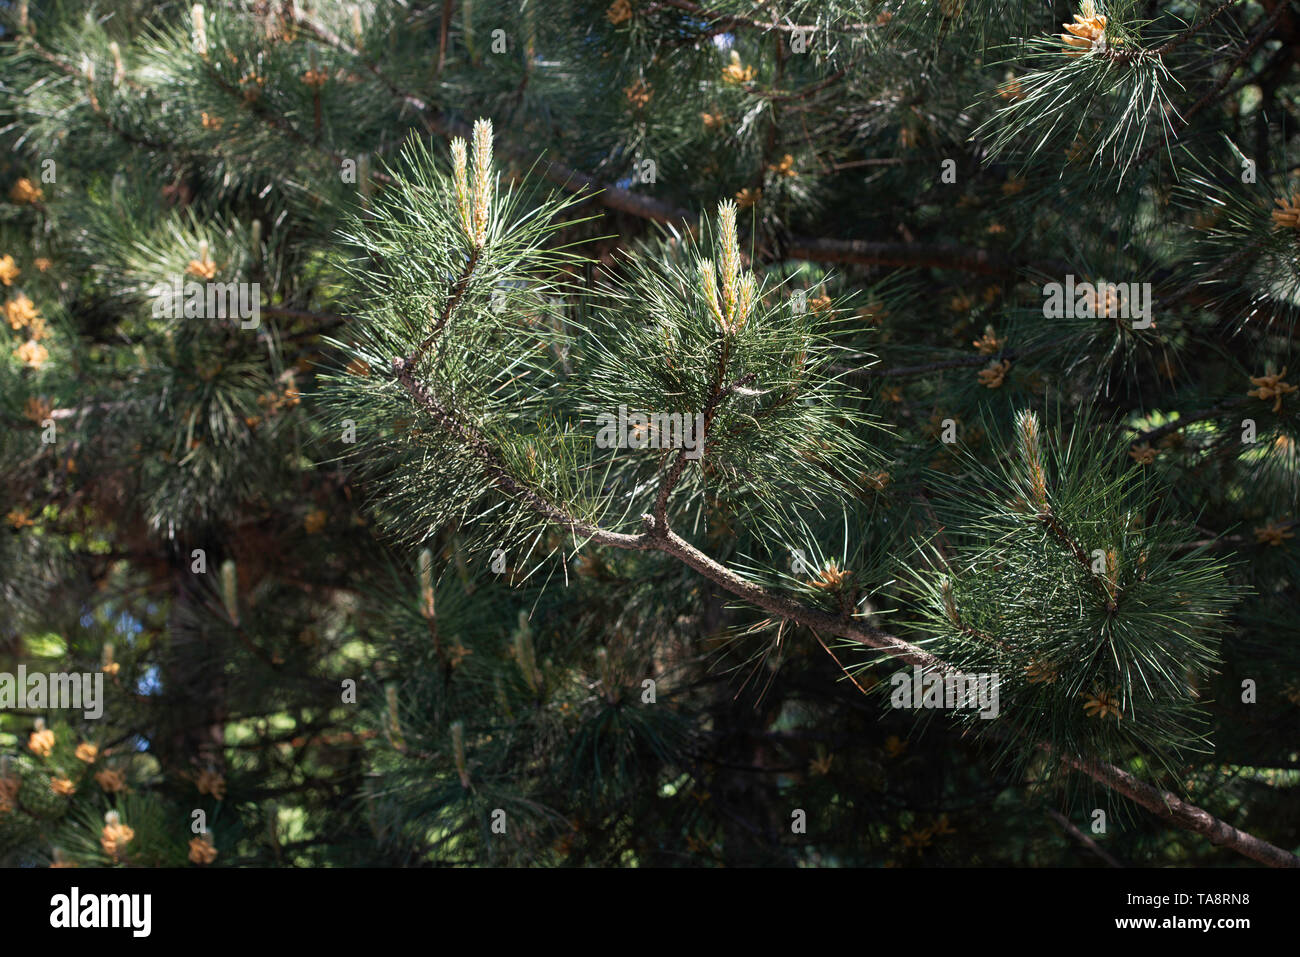 a pine tree in a spring Stock Photo